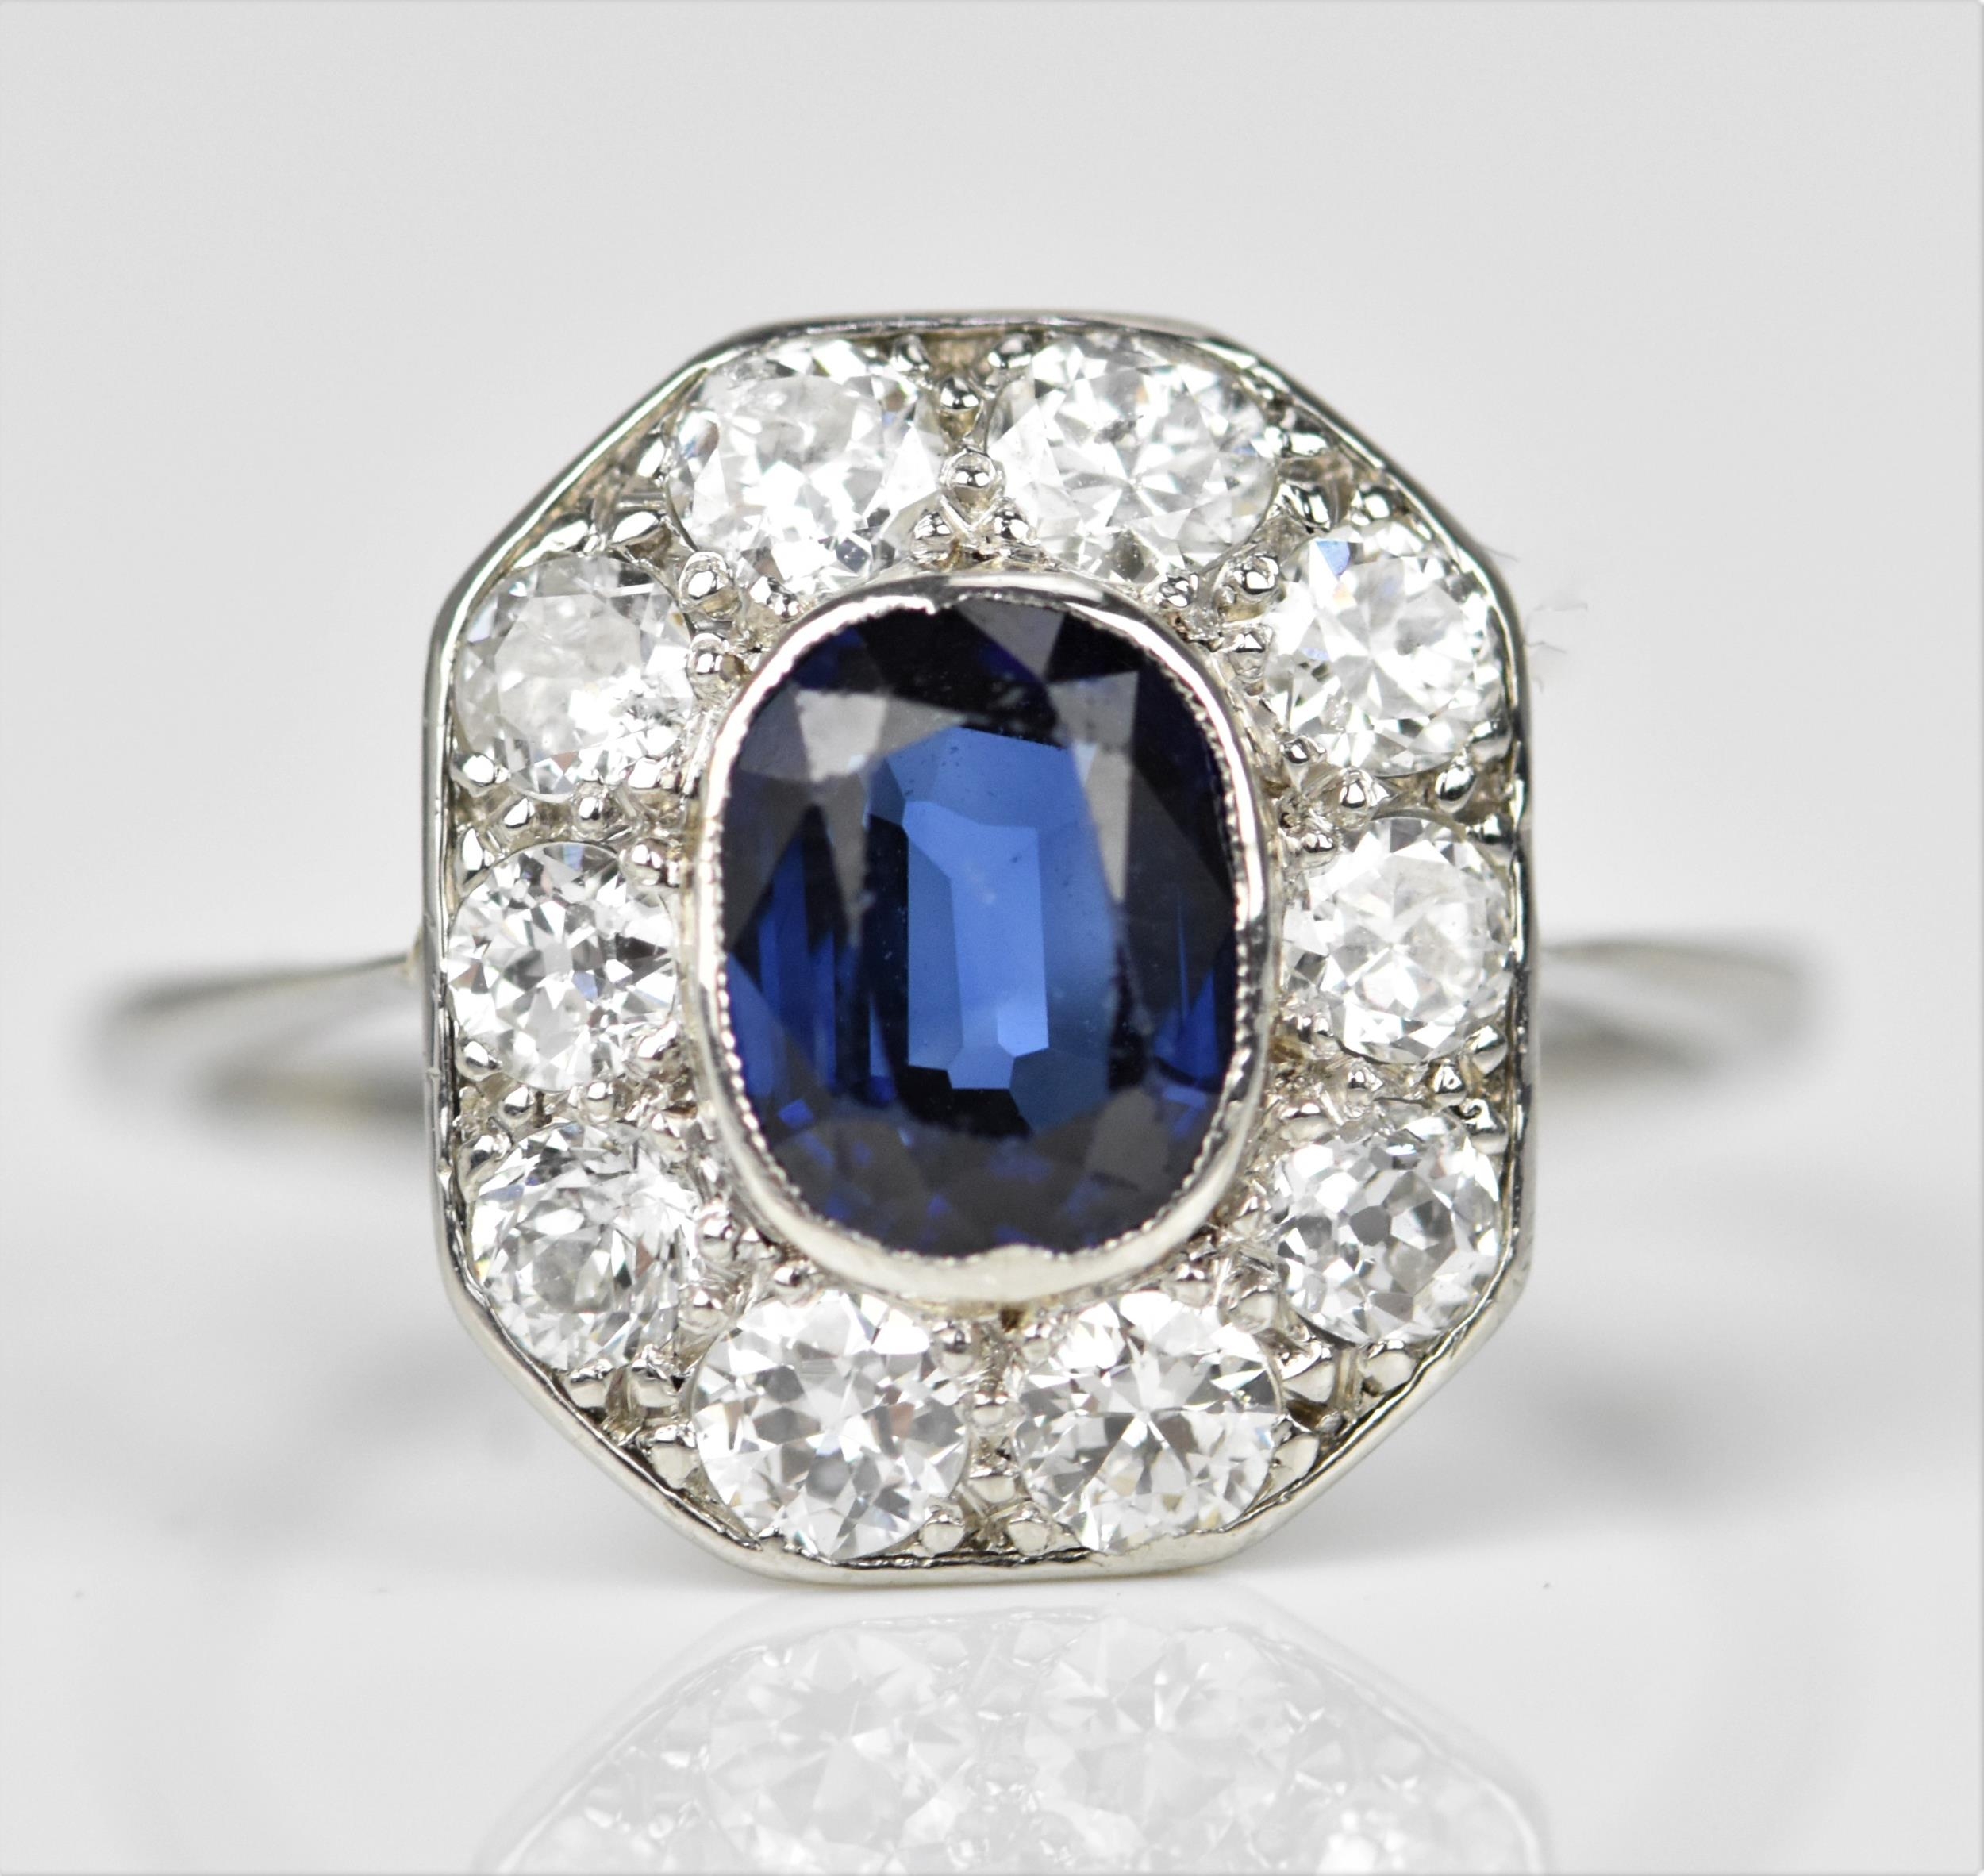 An Art Deco platinum, diamond and sapphire dress ring, the central deep blue sapphire in a